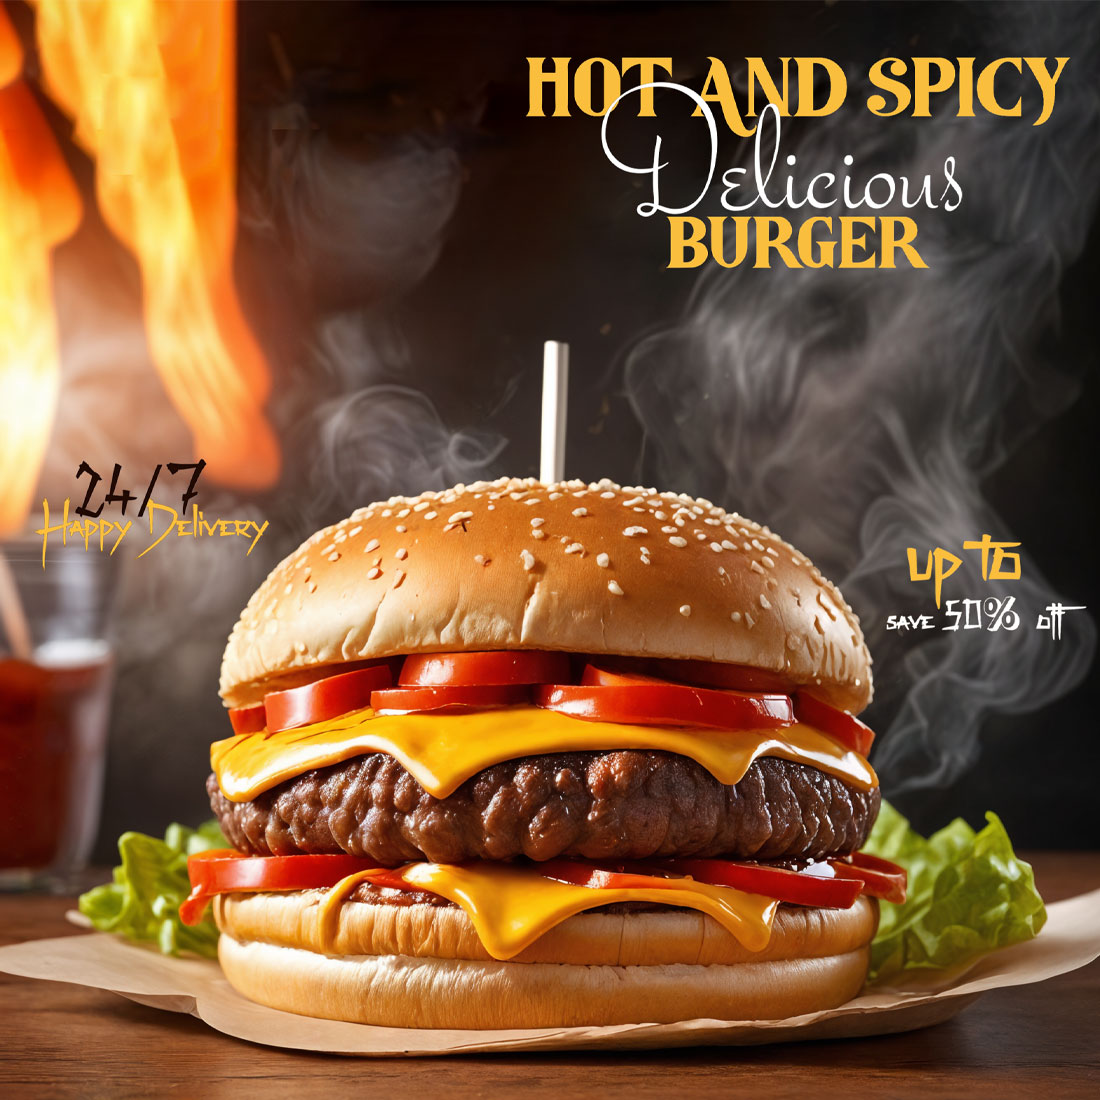 Hot, Spicy and Delicious Burger cover image.